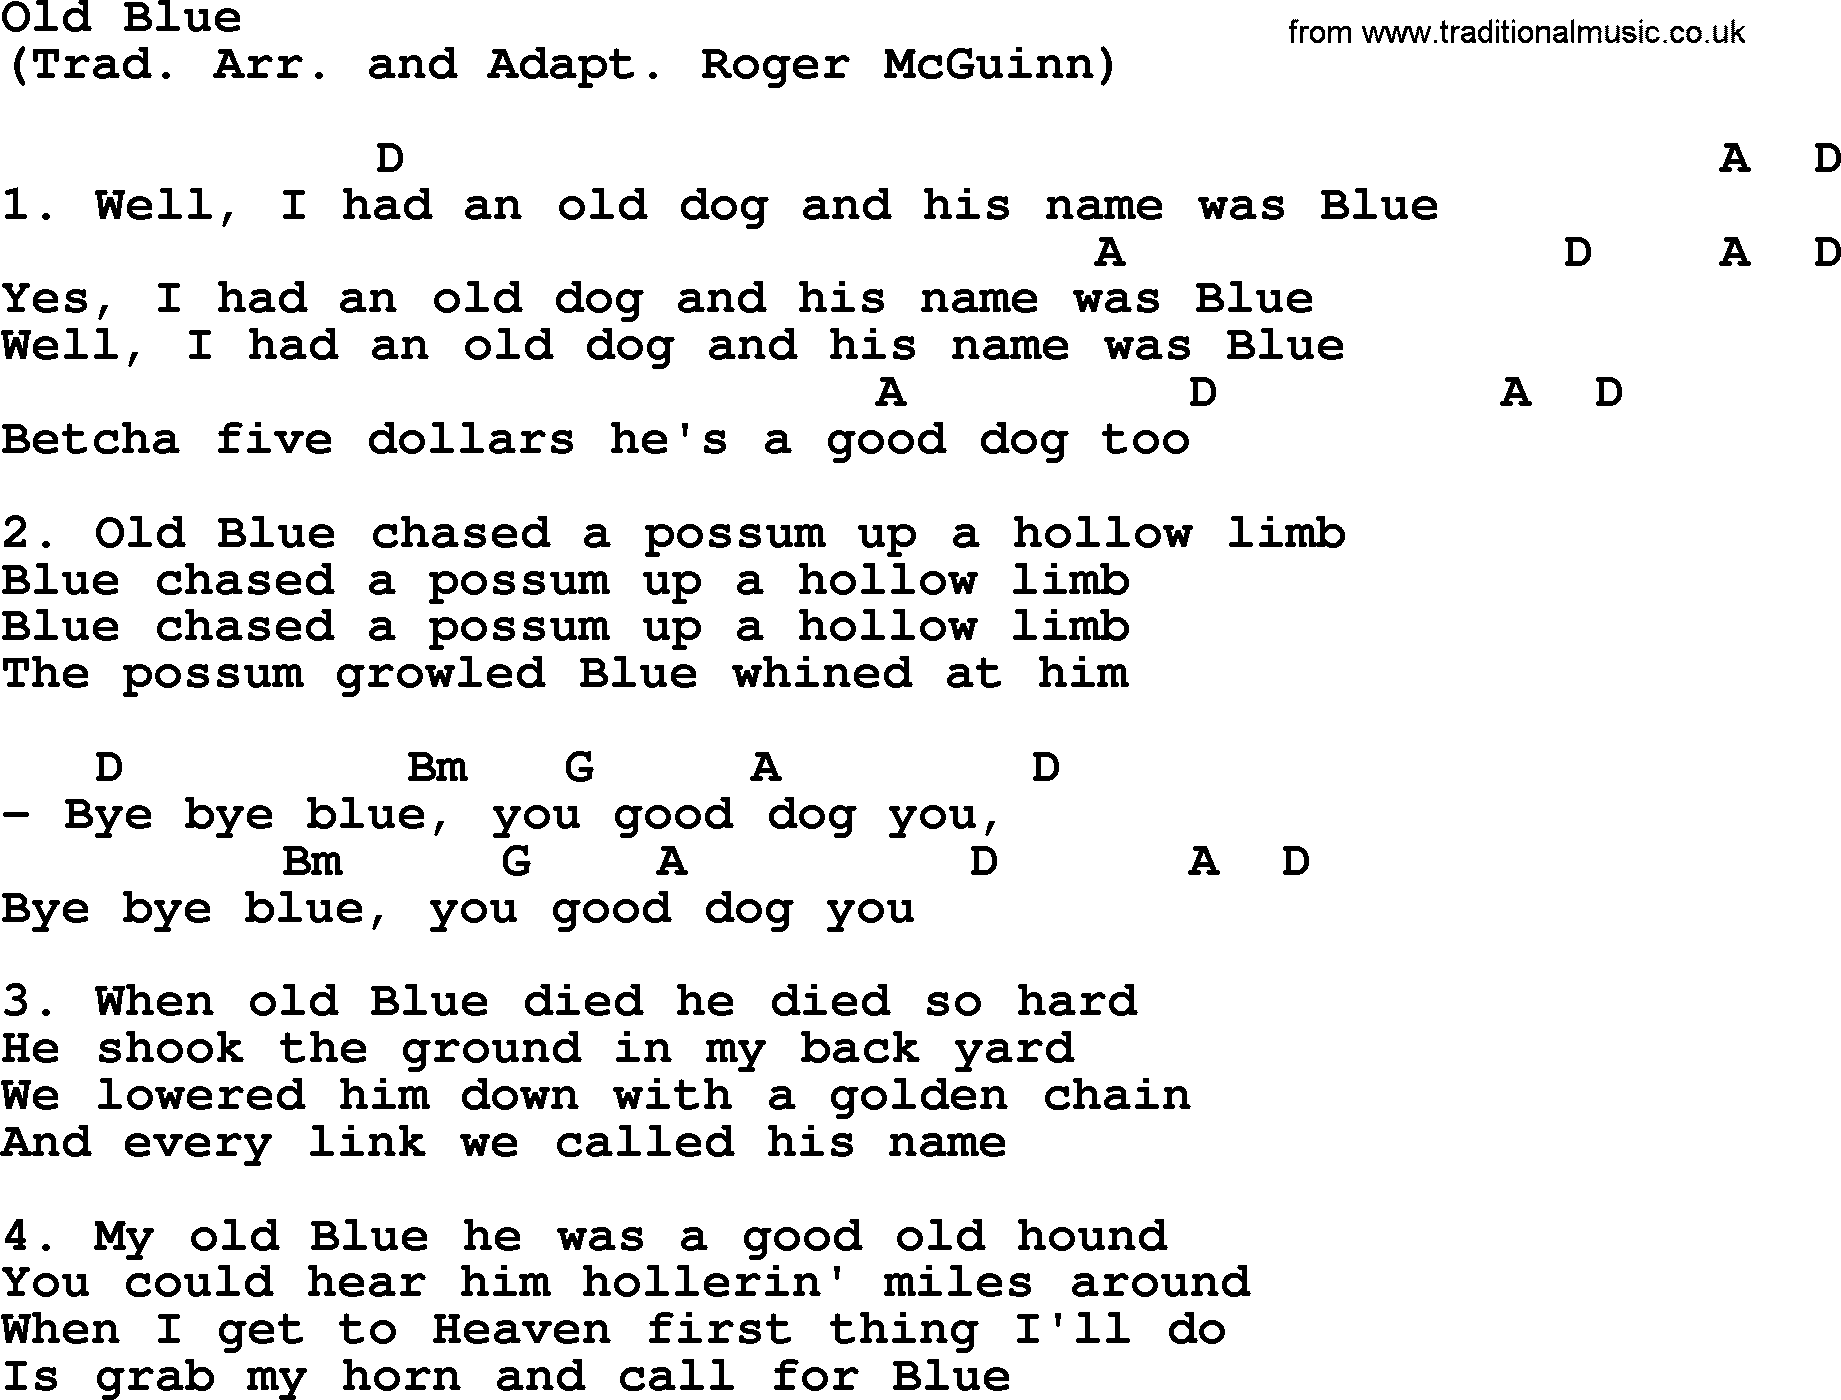 The Byrds song Old Blue, lyrics and chords